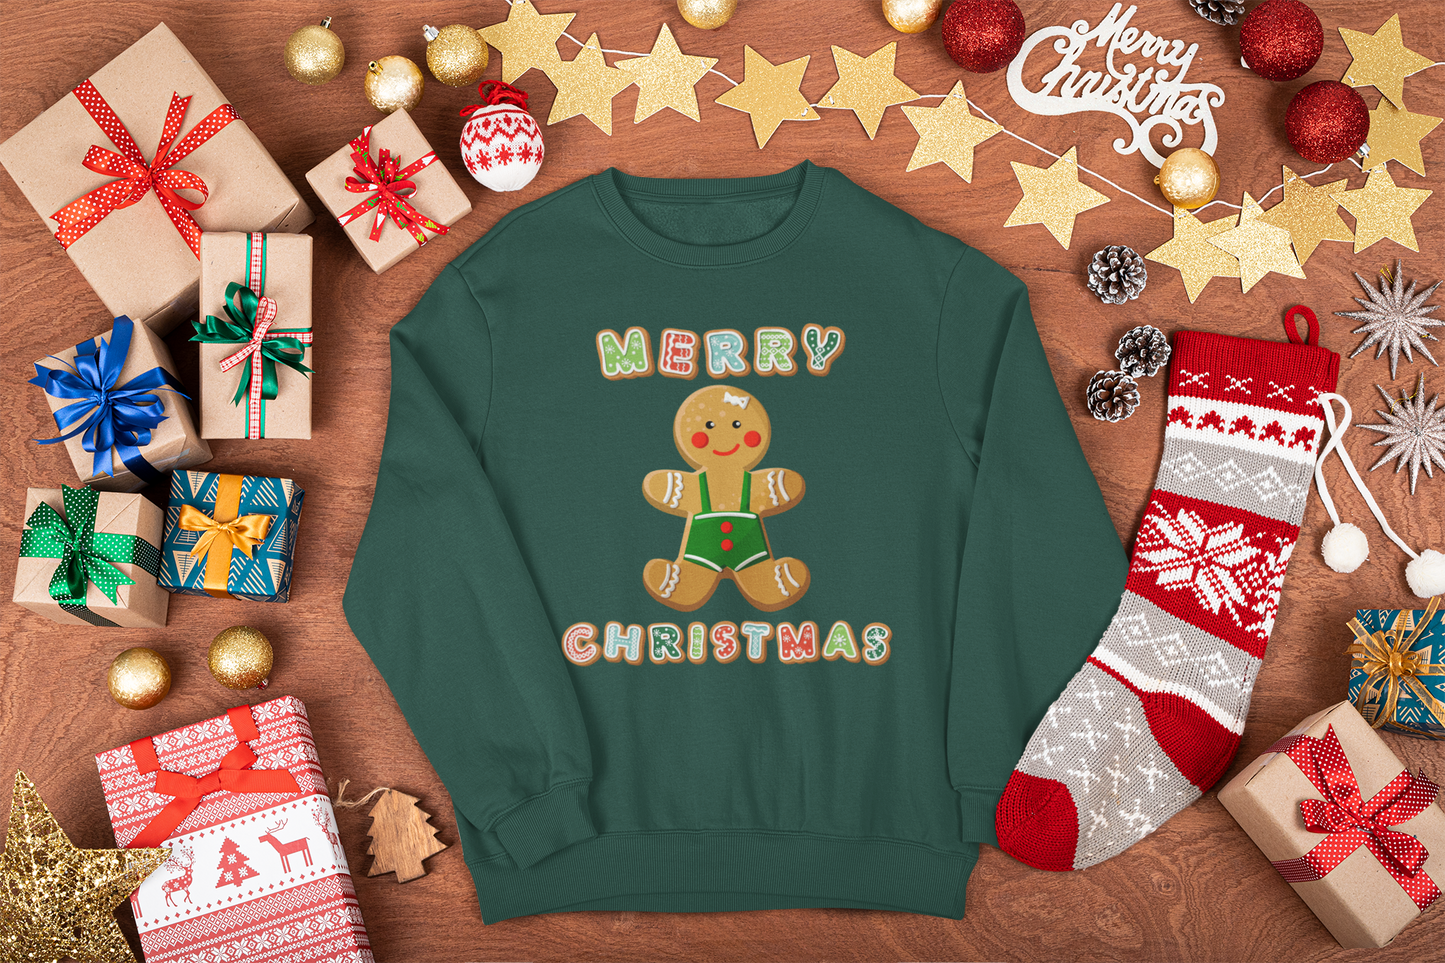 Children's Christmas Jumpers - Cute, Cozy and Warm